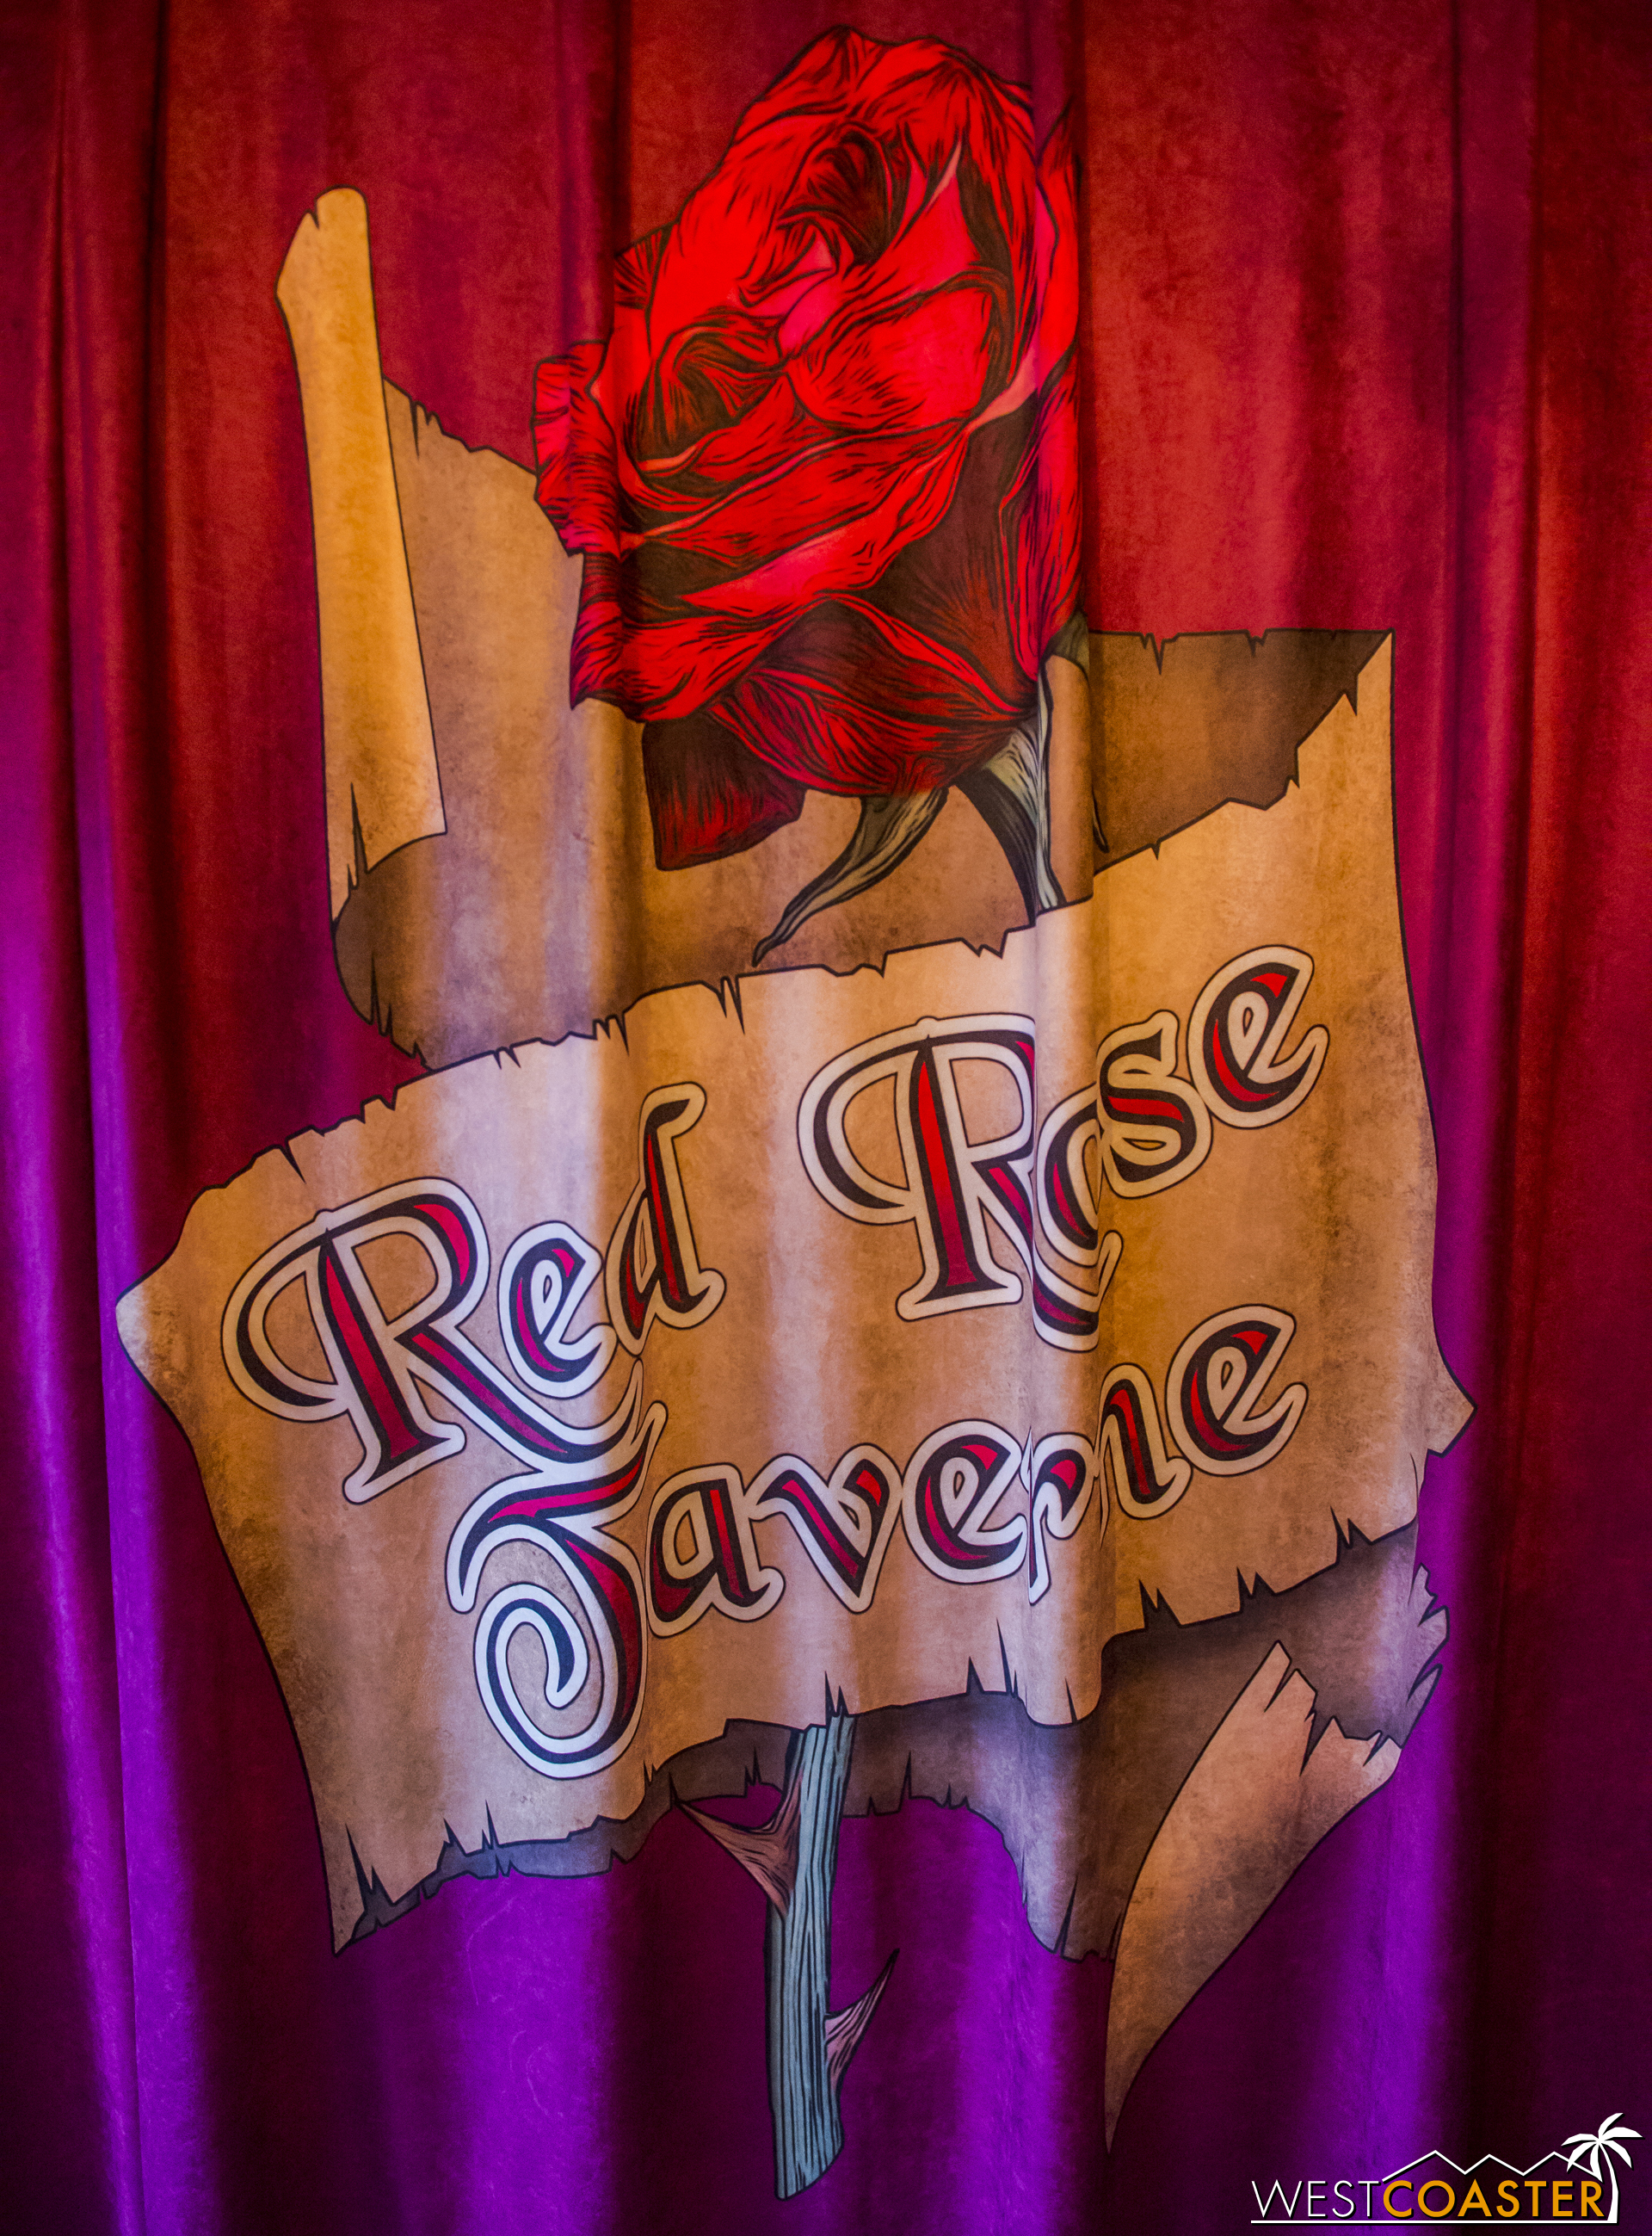  Entering the building, curtains with the Red Rose Taverne logo drape both sides, covering up the regular Pinocchio murals. 